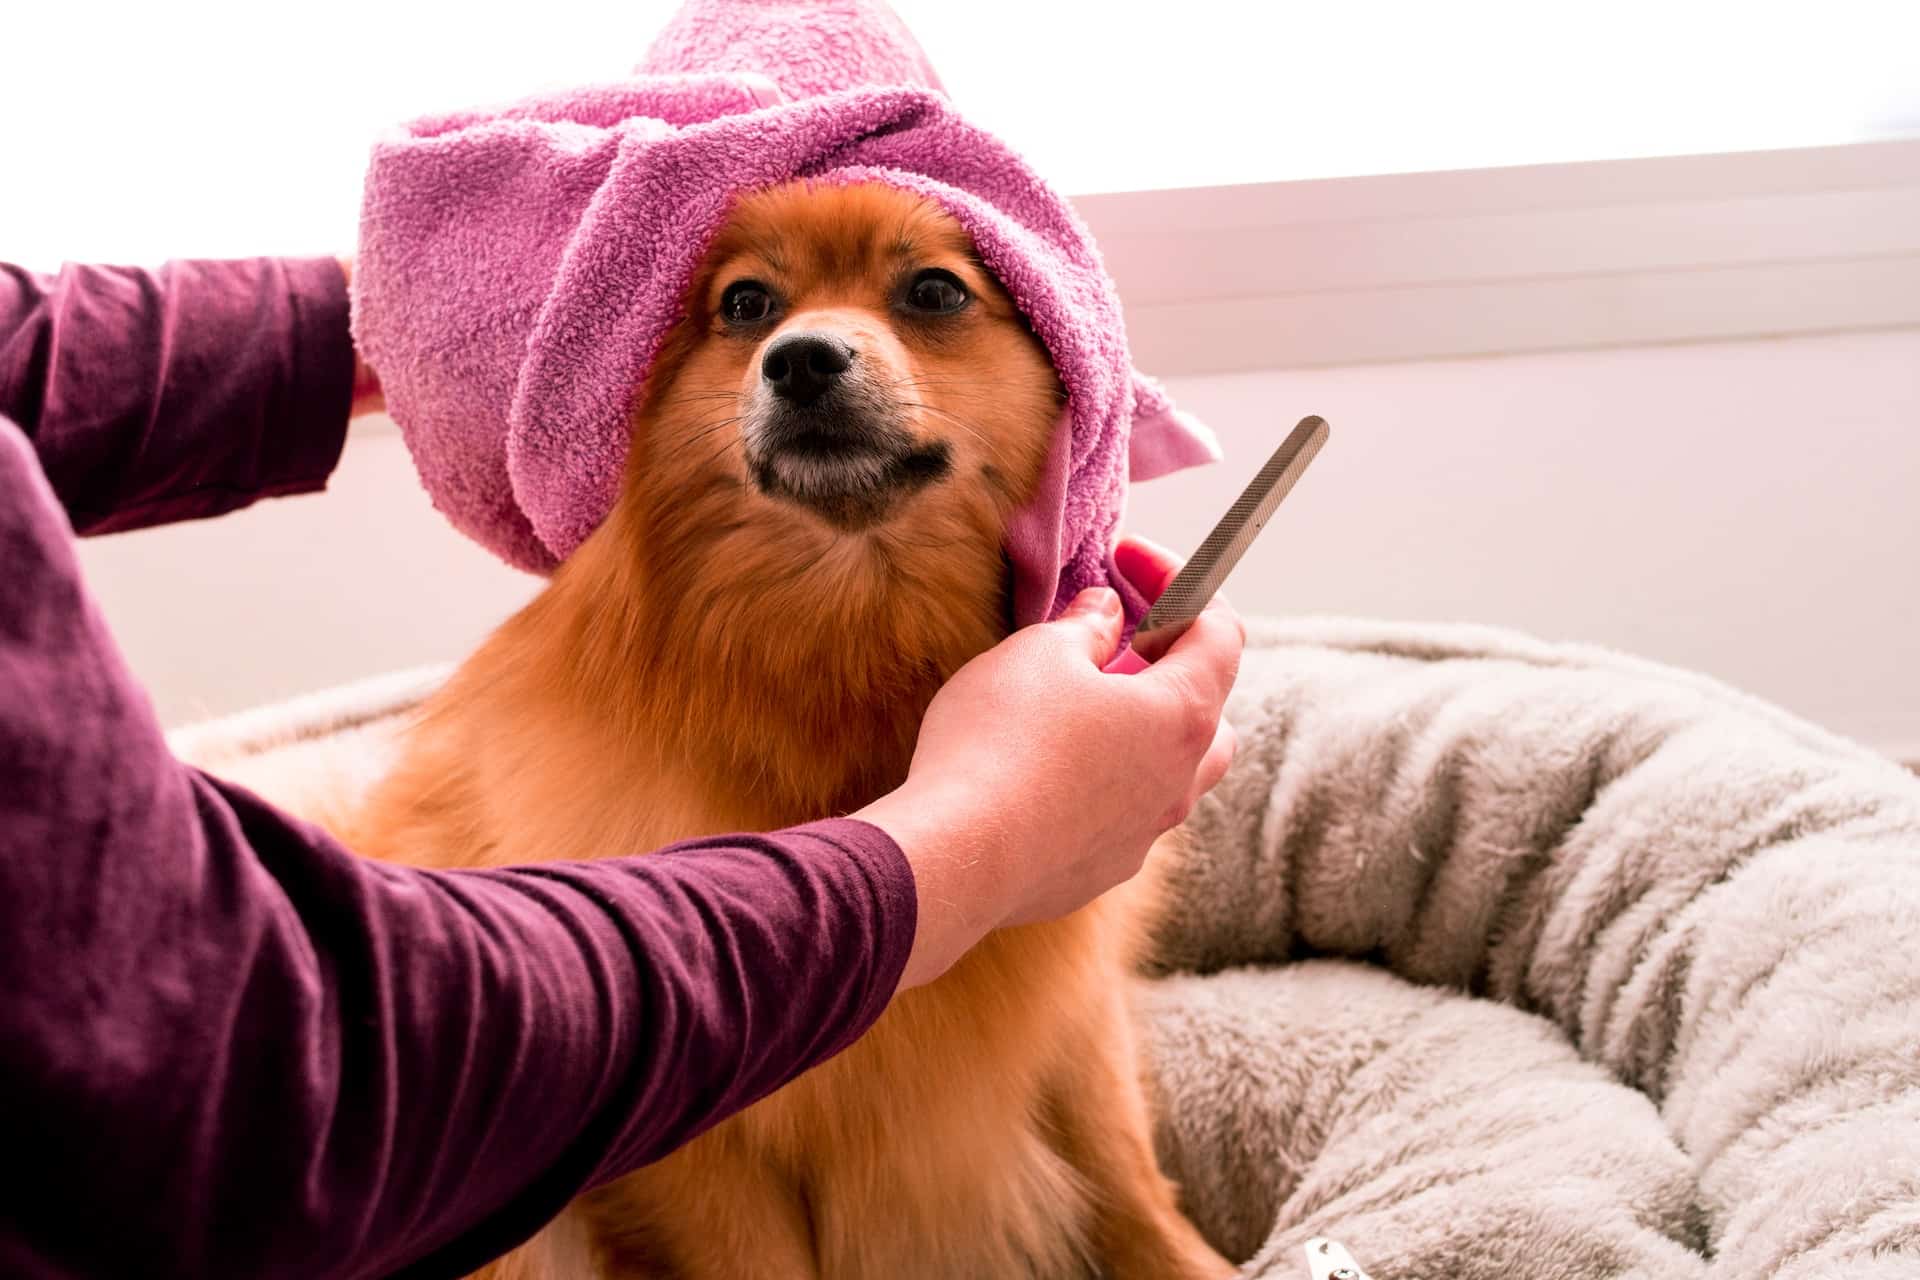 A small dog with a towel on its head and having its fur trimmed, representing employment contracts within family businesses.